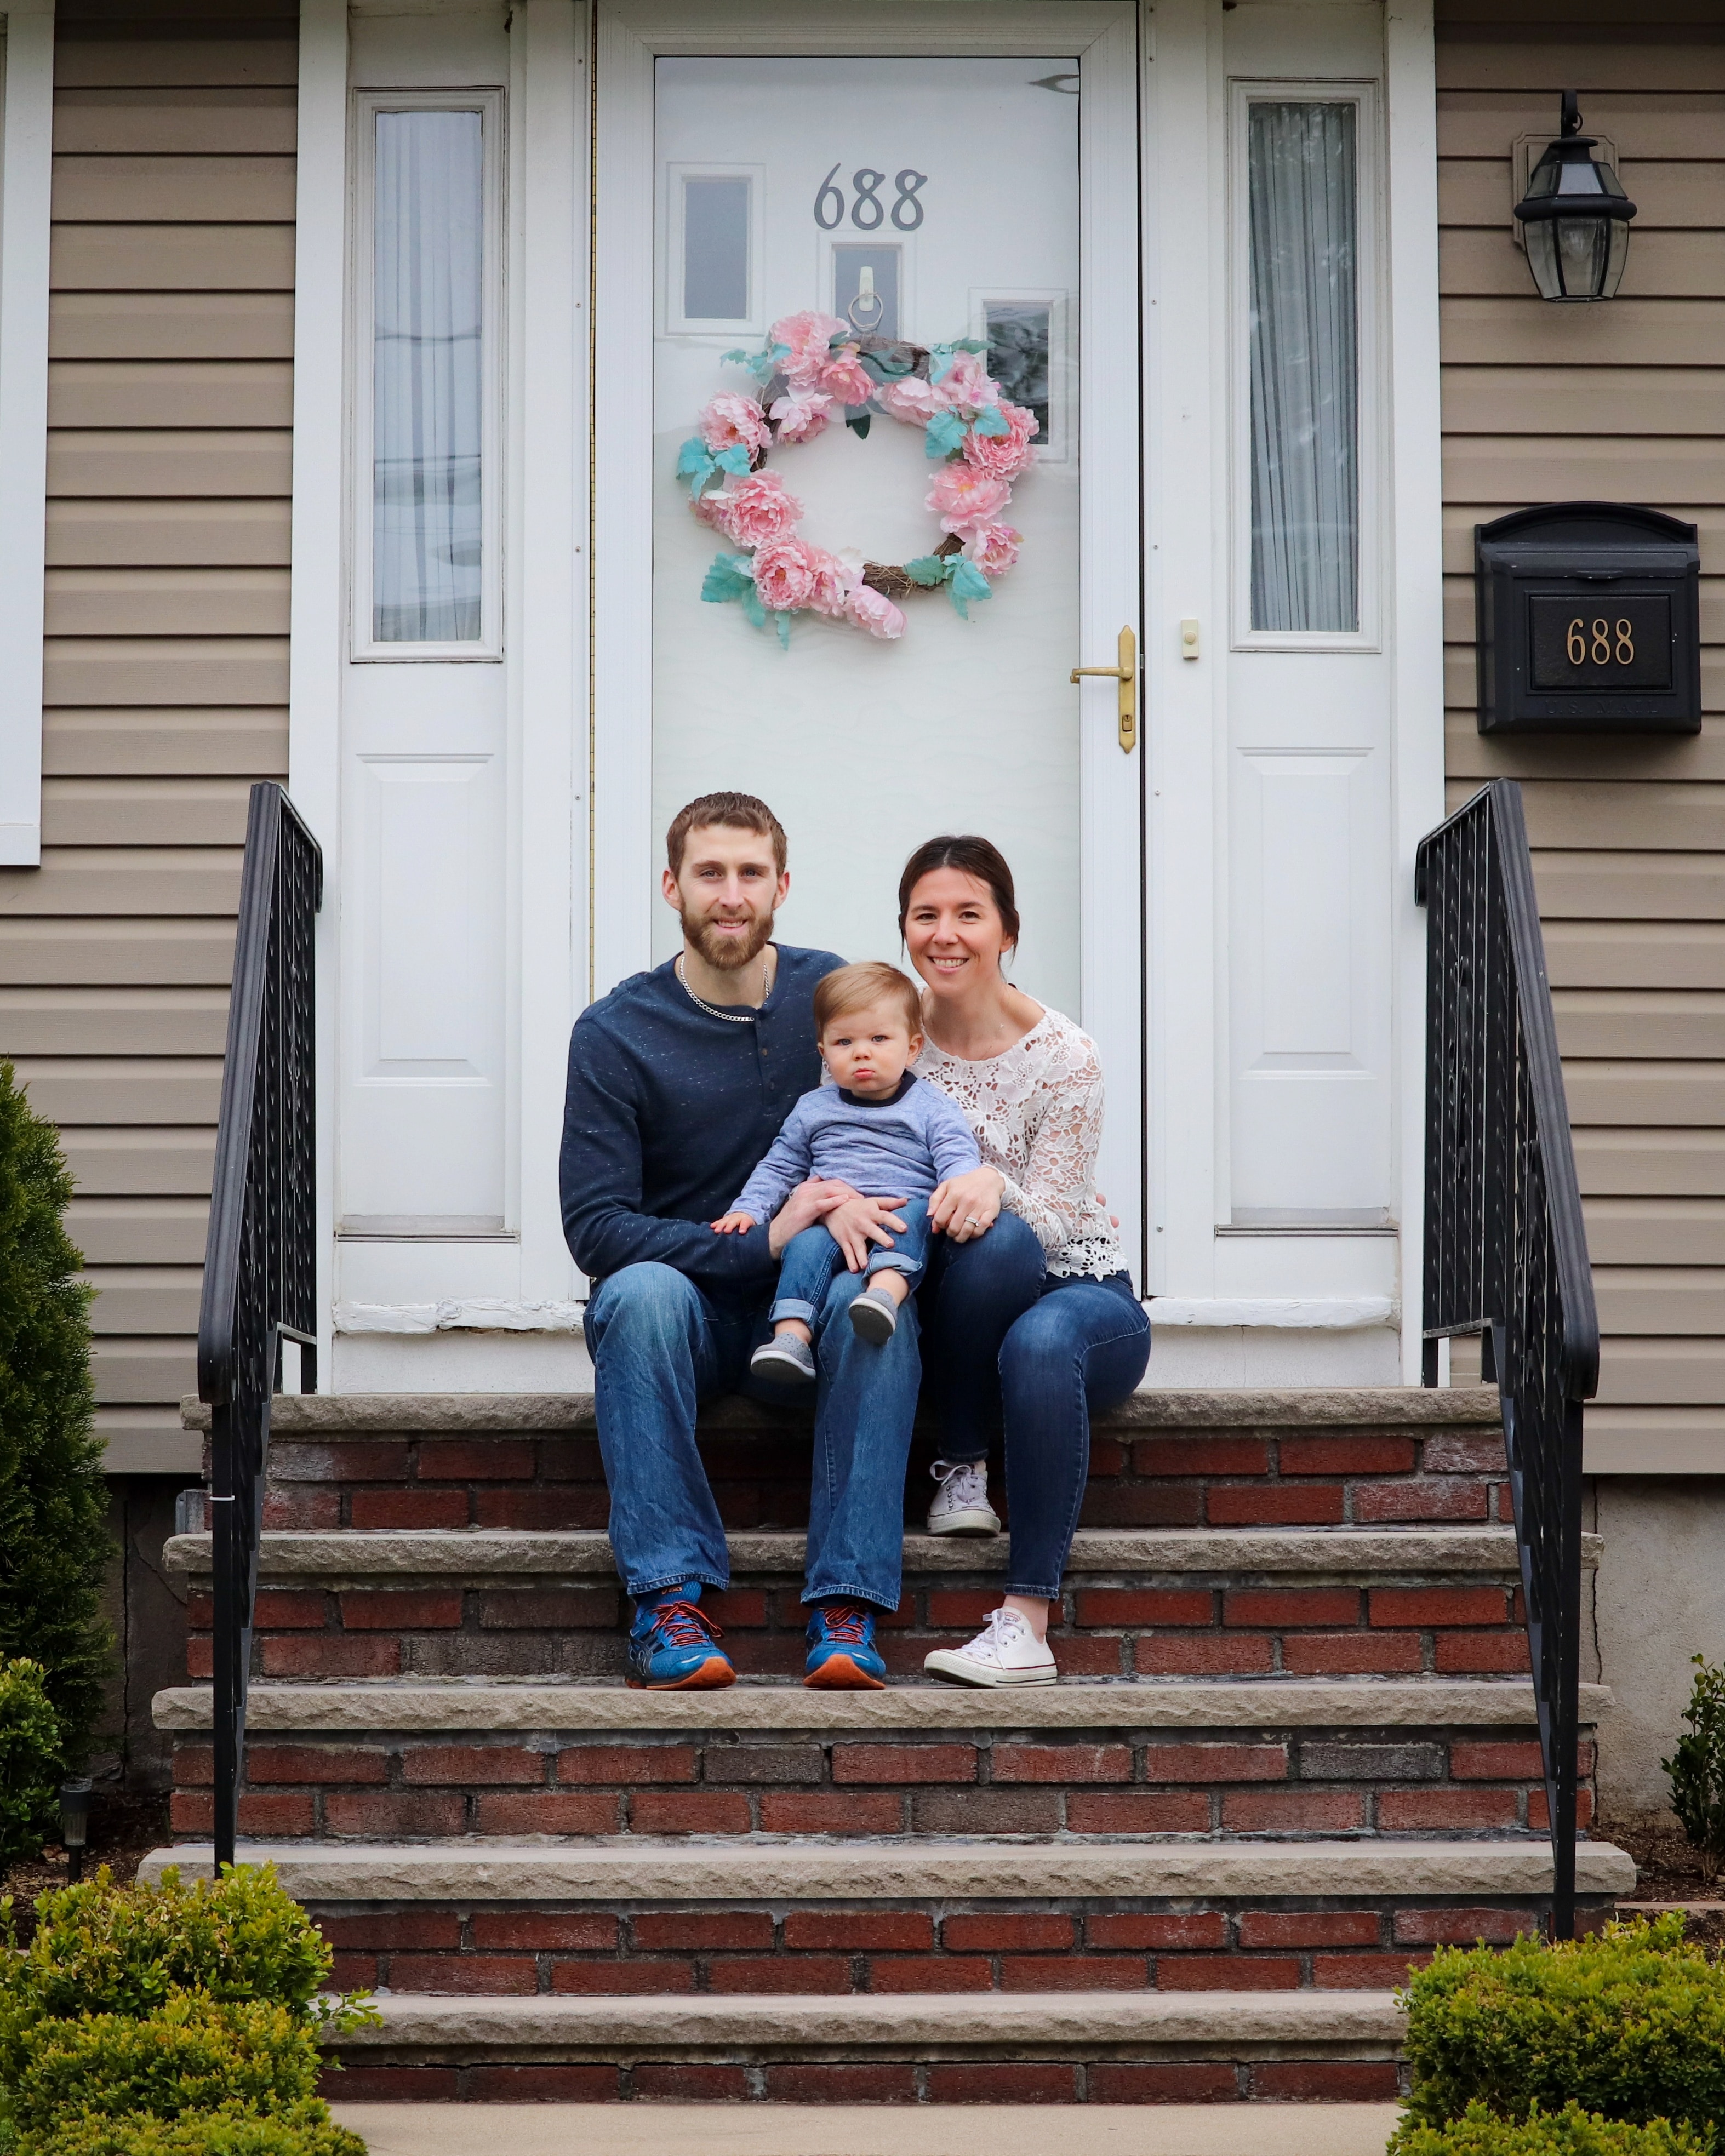 Family of three sitting in front of their front door which is white and has a wreath.